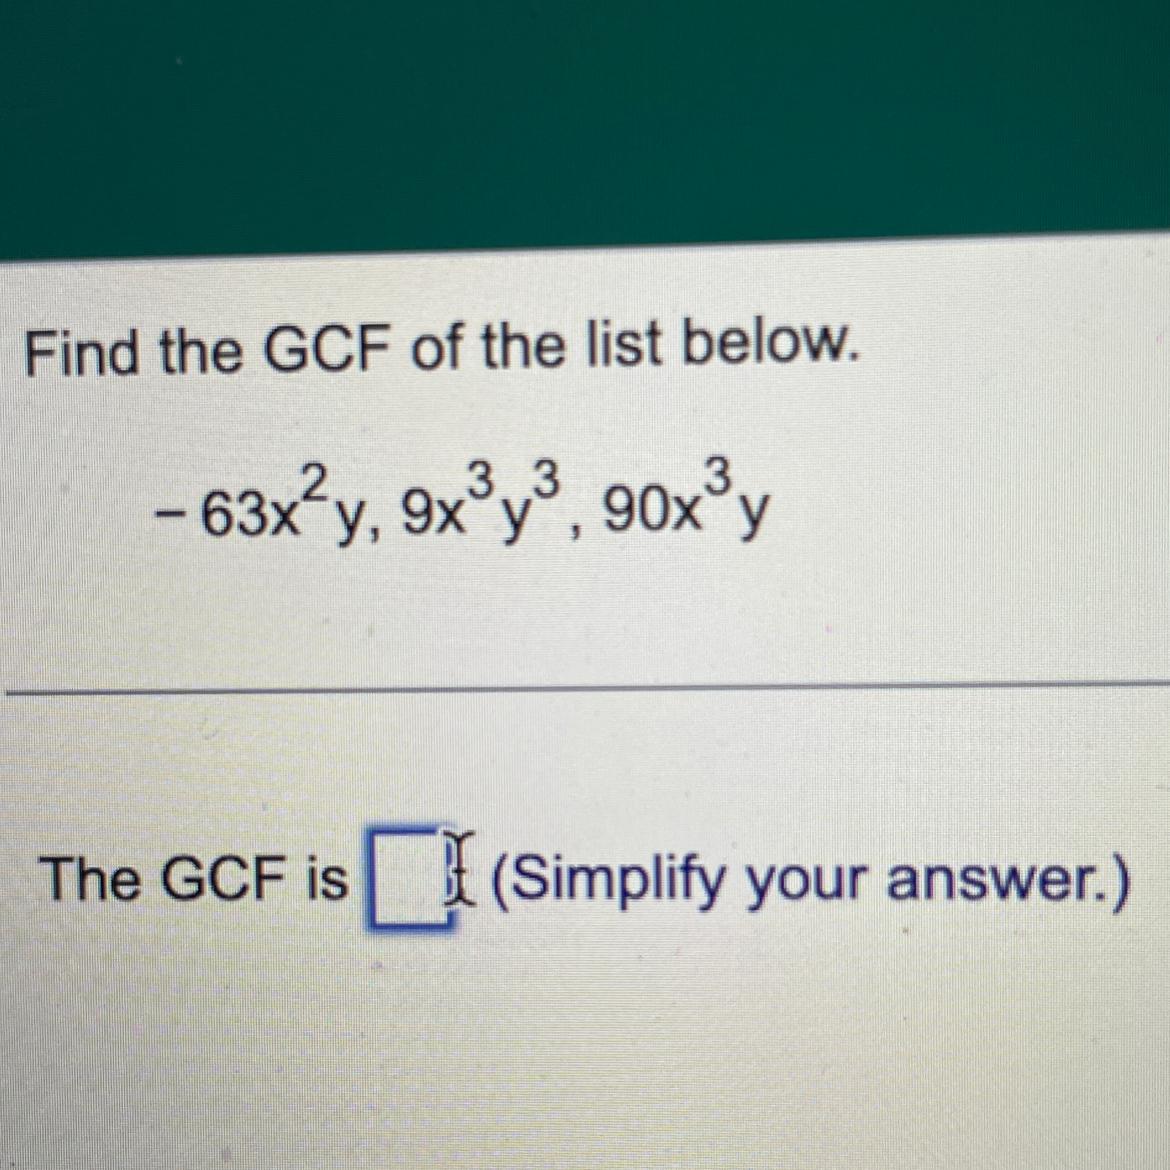 What Is The GCF In Simplify Form